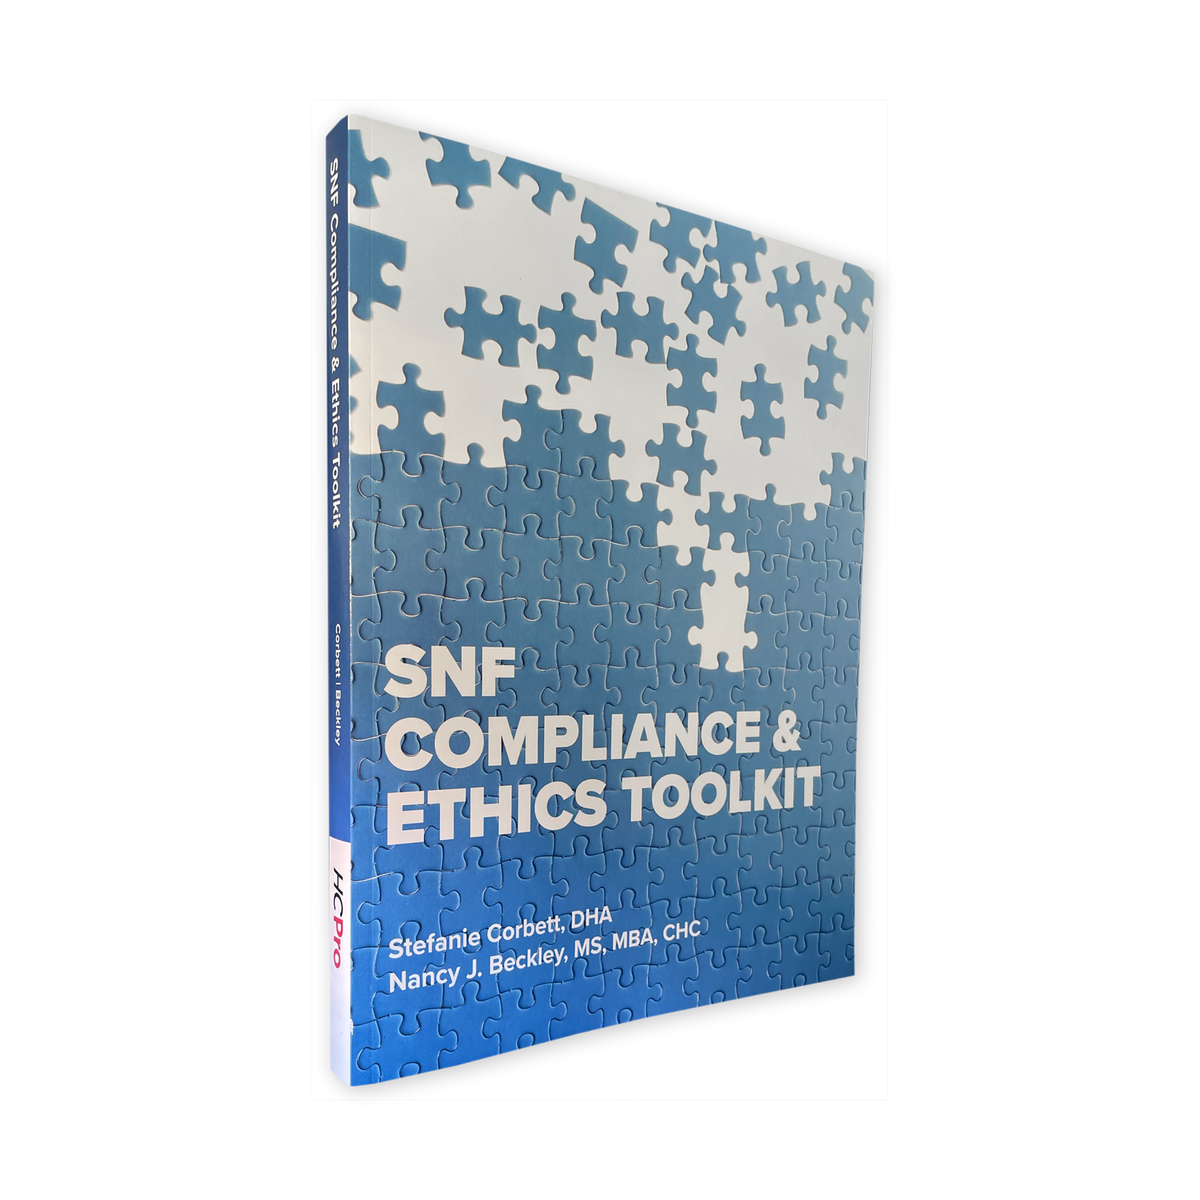 SNF Compliance & Ethics Toolkit